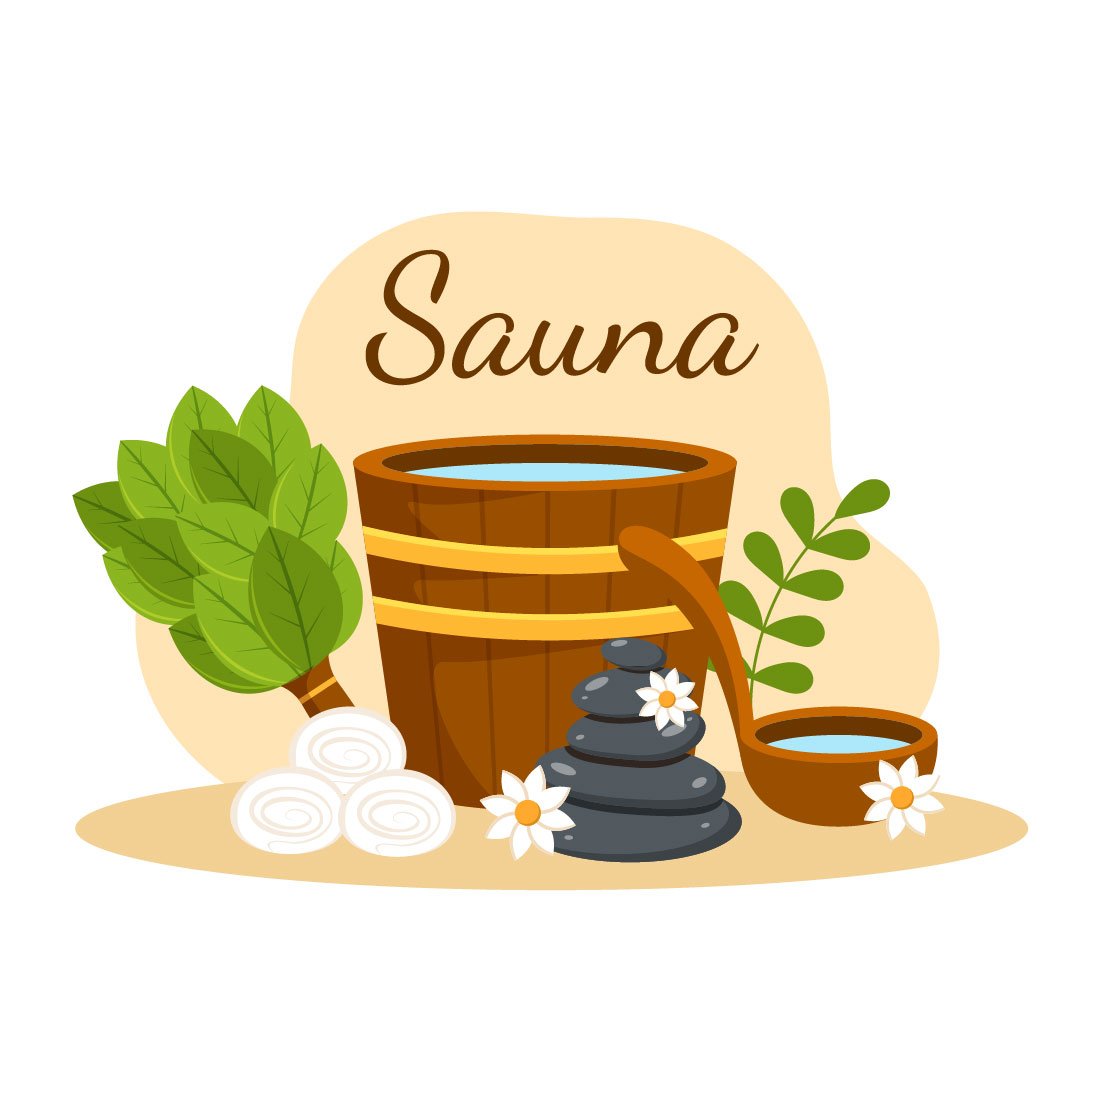 Great image with sauna accessories.